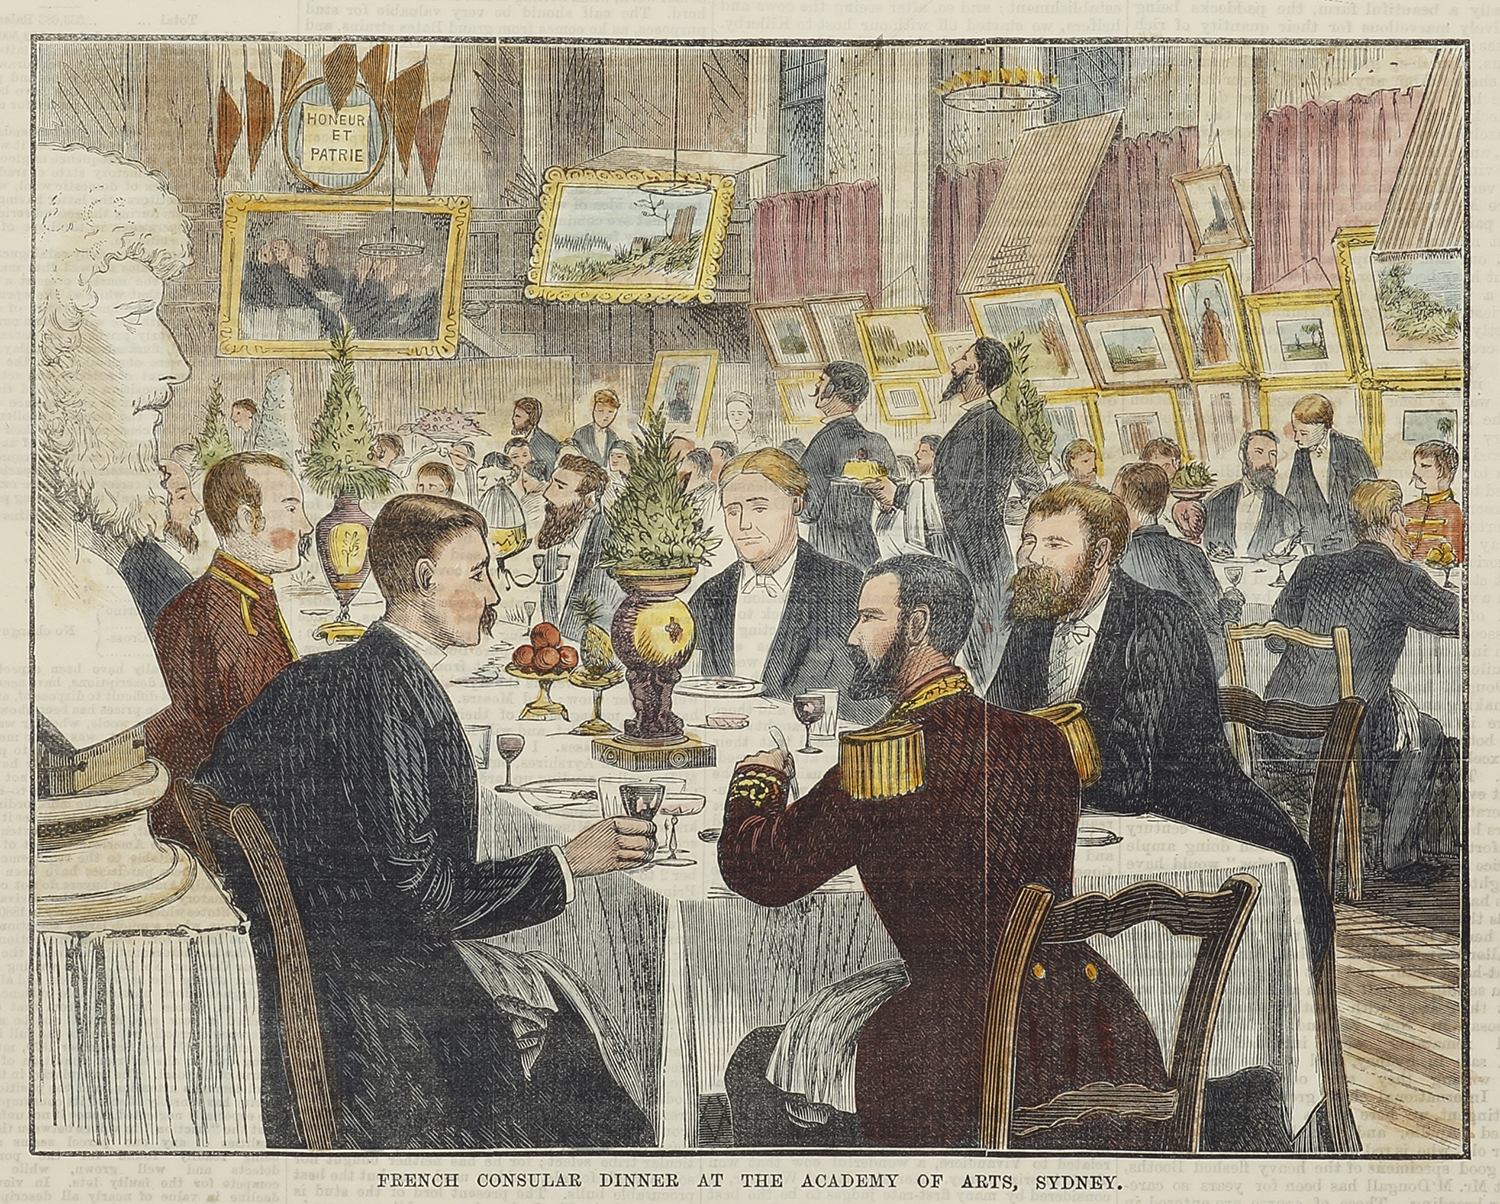 French Consular Dinner at the Academy of Arts, Sydney. - Antique Print from 1879